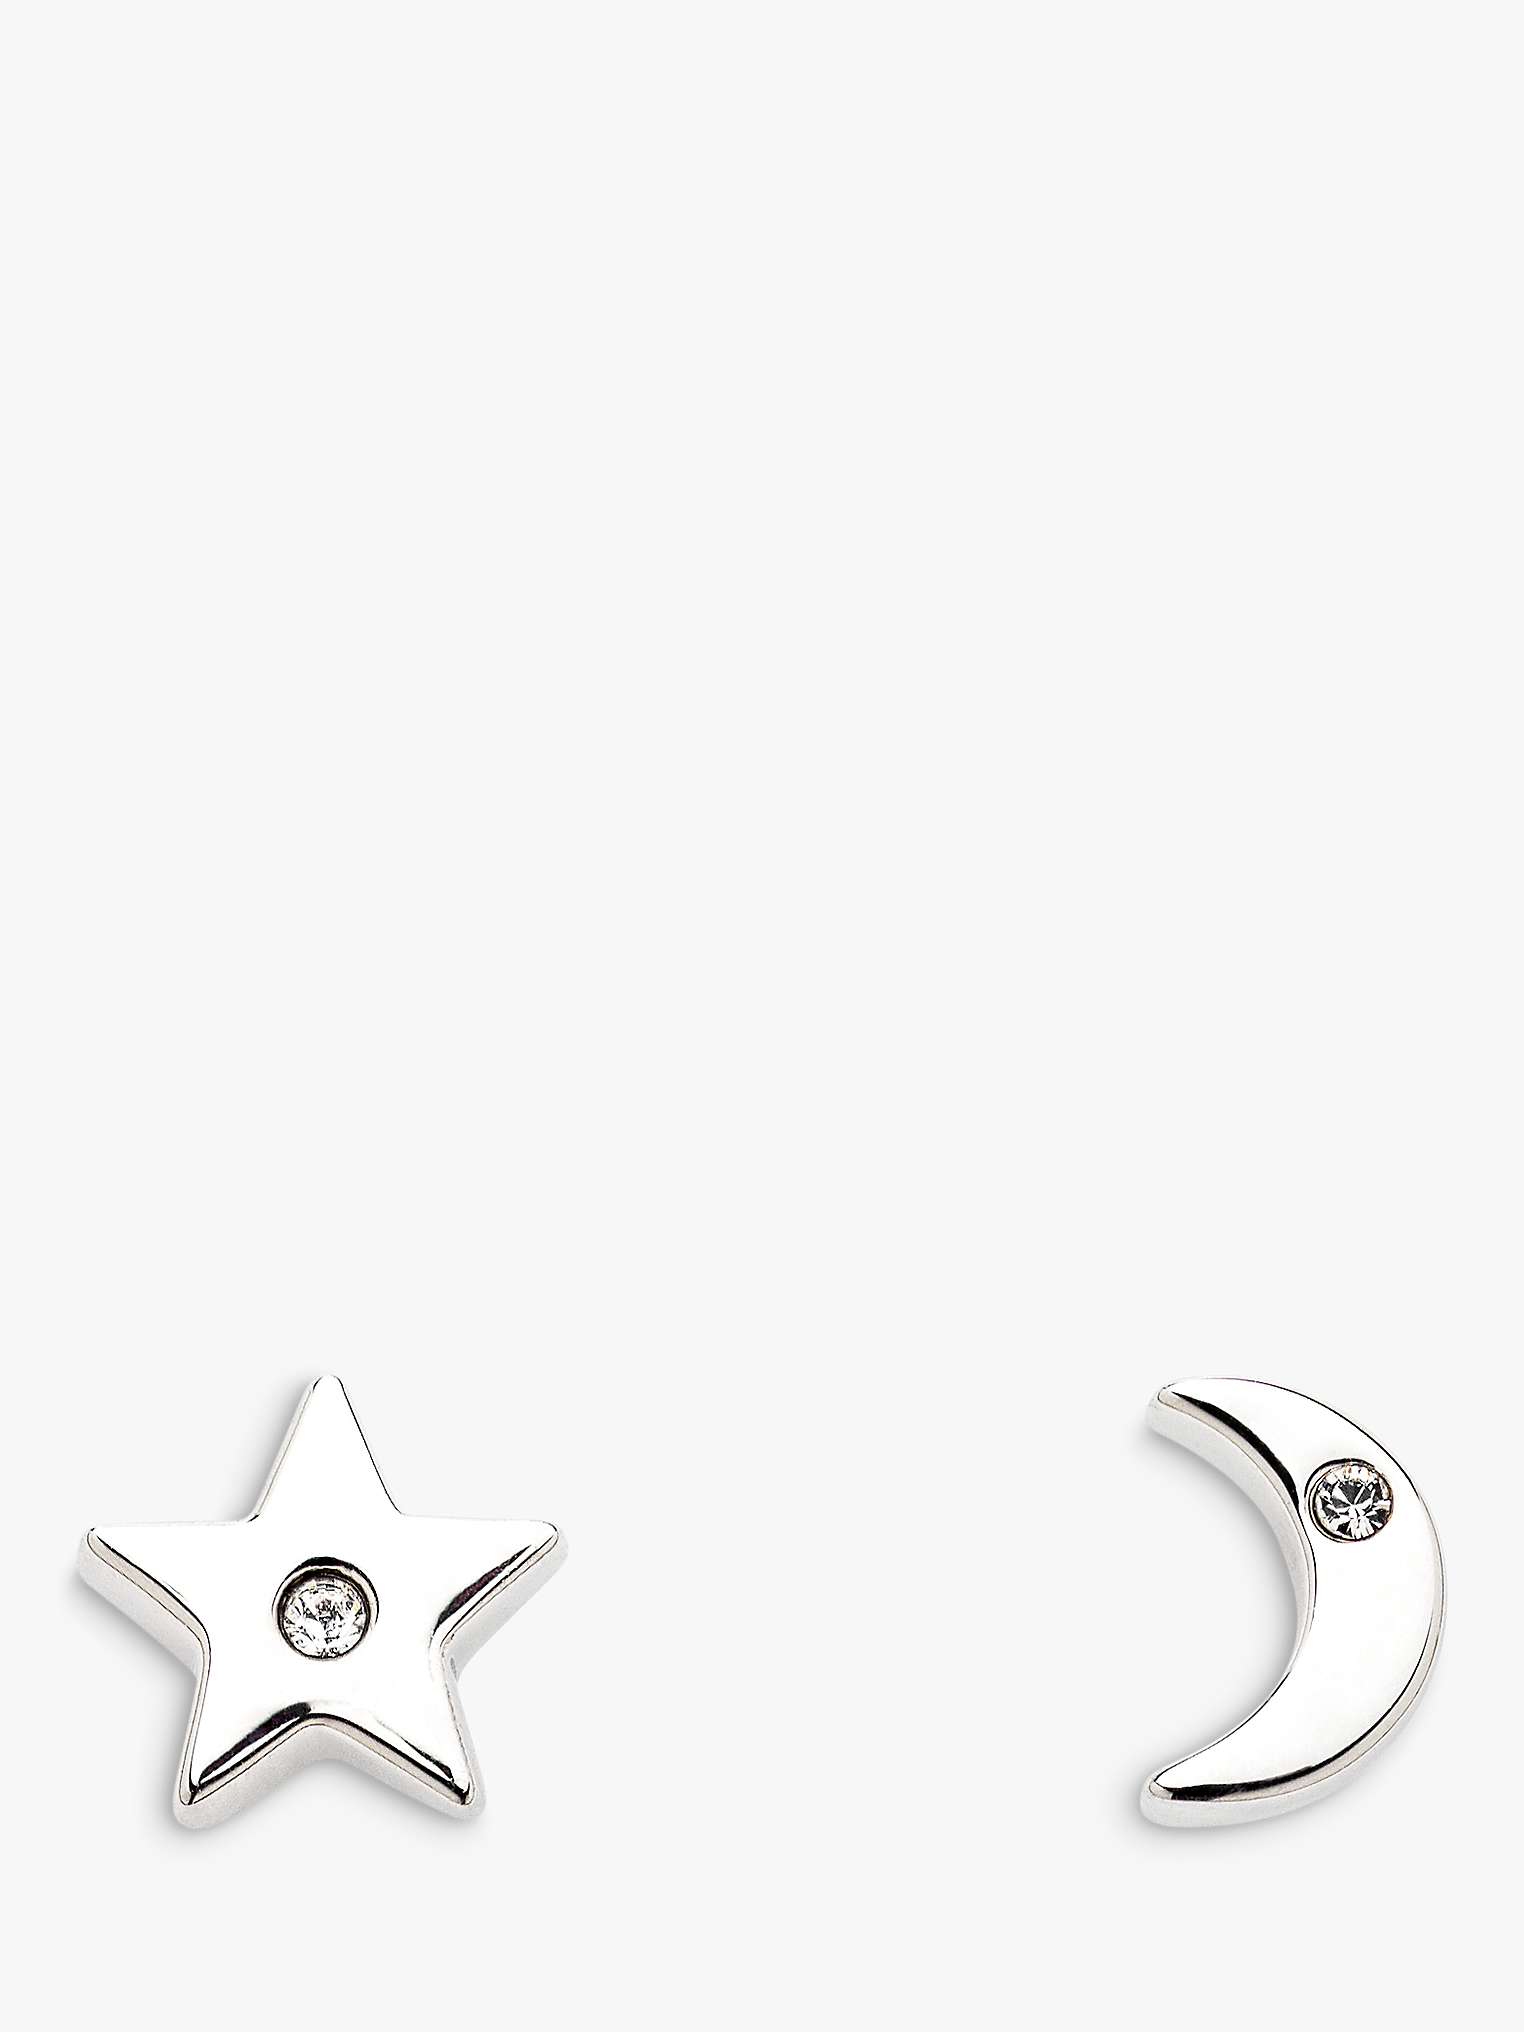 Buy Melissa Odabash Crystal Star and Moon Stud Earrings, Silver Online at johnlewis.com